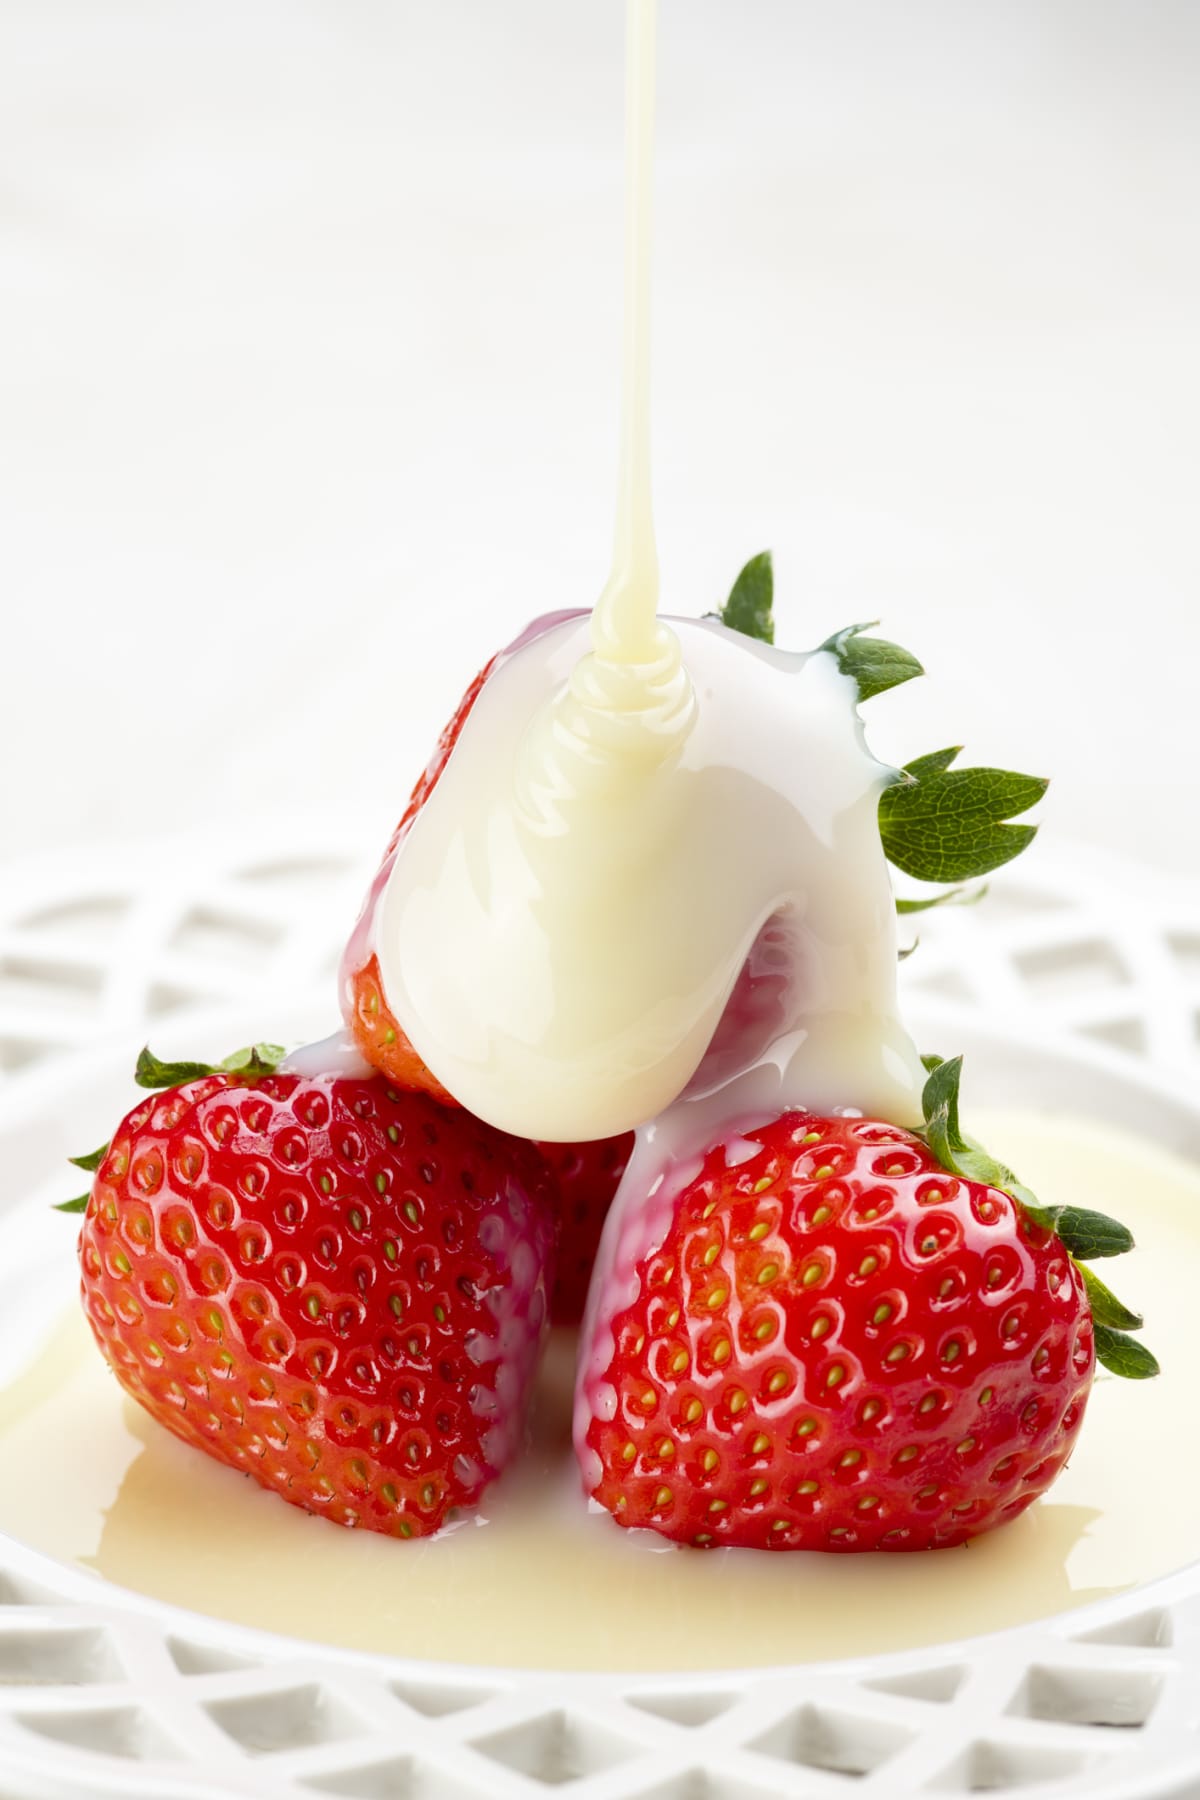 Drizzling condensed milk on strawberries